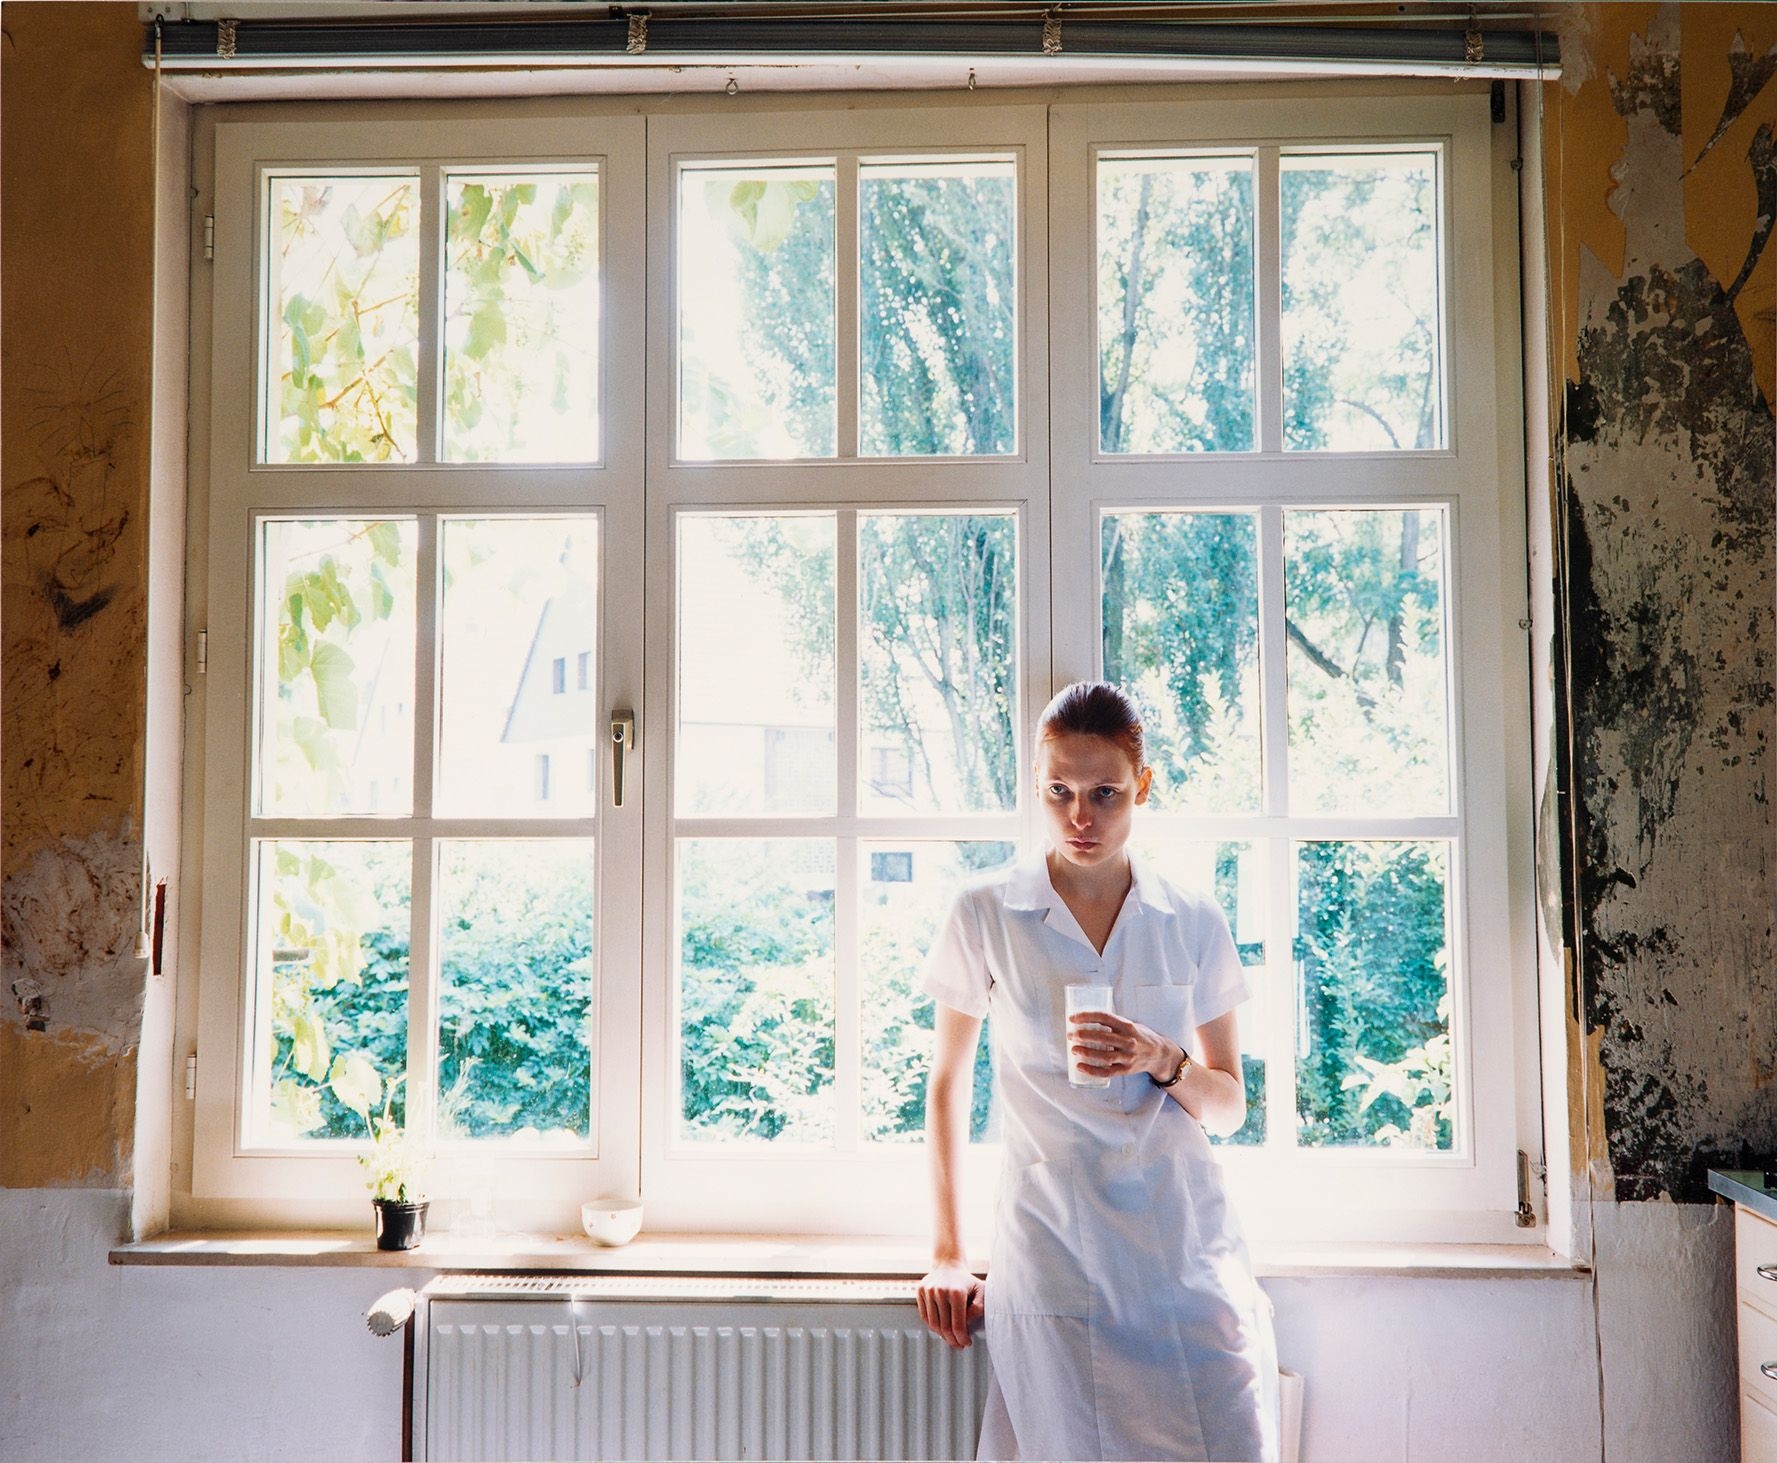 Artwork by Aino Kannisto, Untitled (Woman in front of window), Made of C print on photographic paper mounted on aluminum